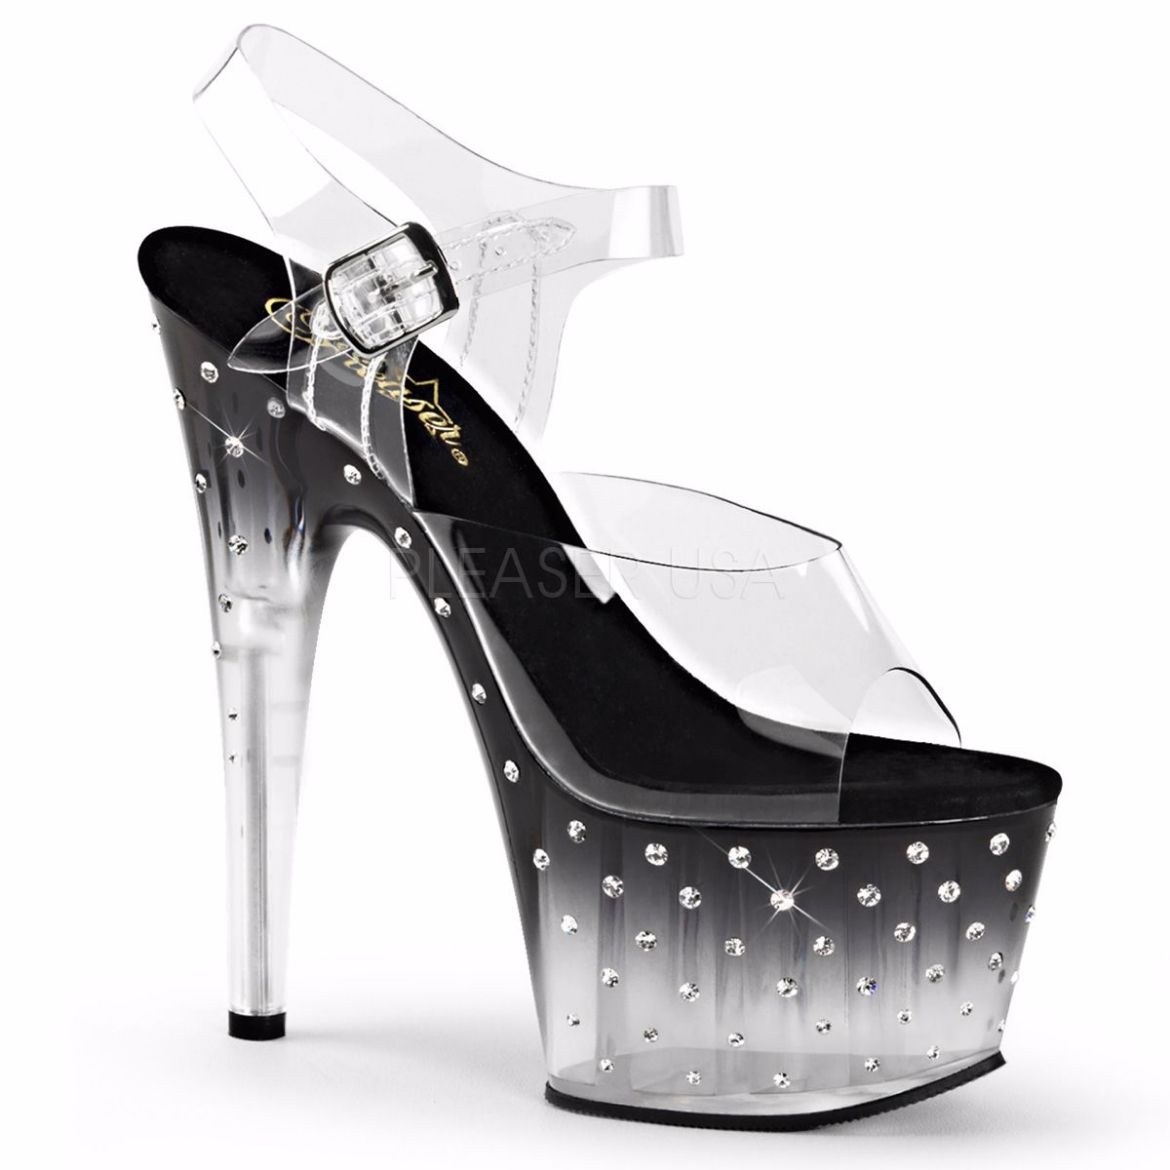 Product image of Pleaser Stardust-708T Clear/Black-Clear, 7 inch (17.8 cm) Heel, 2 3/4 inch (7 cm) Platform Sandal Shoes